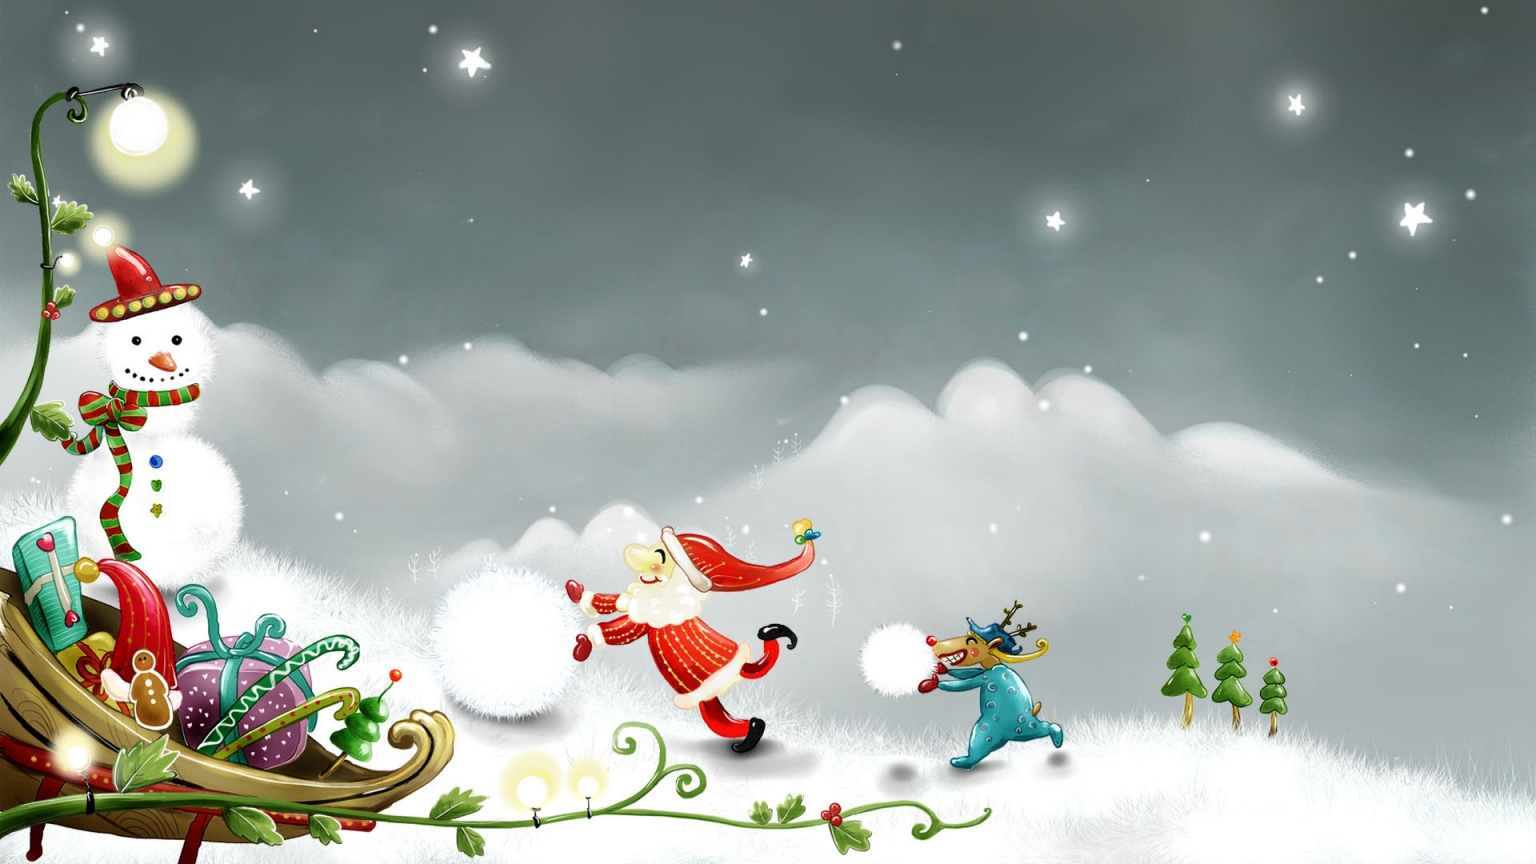 Snowman and Santa Claus for 1536 x 864 HDTV resolution